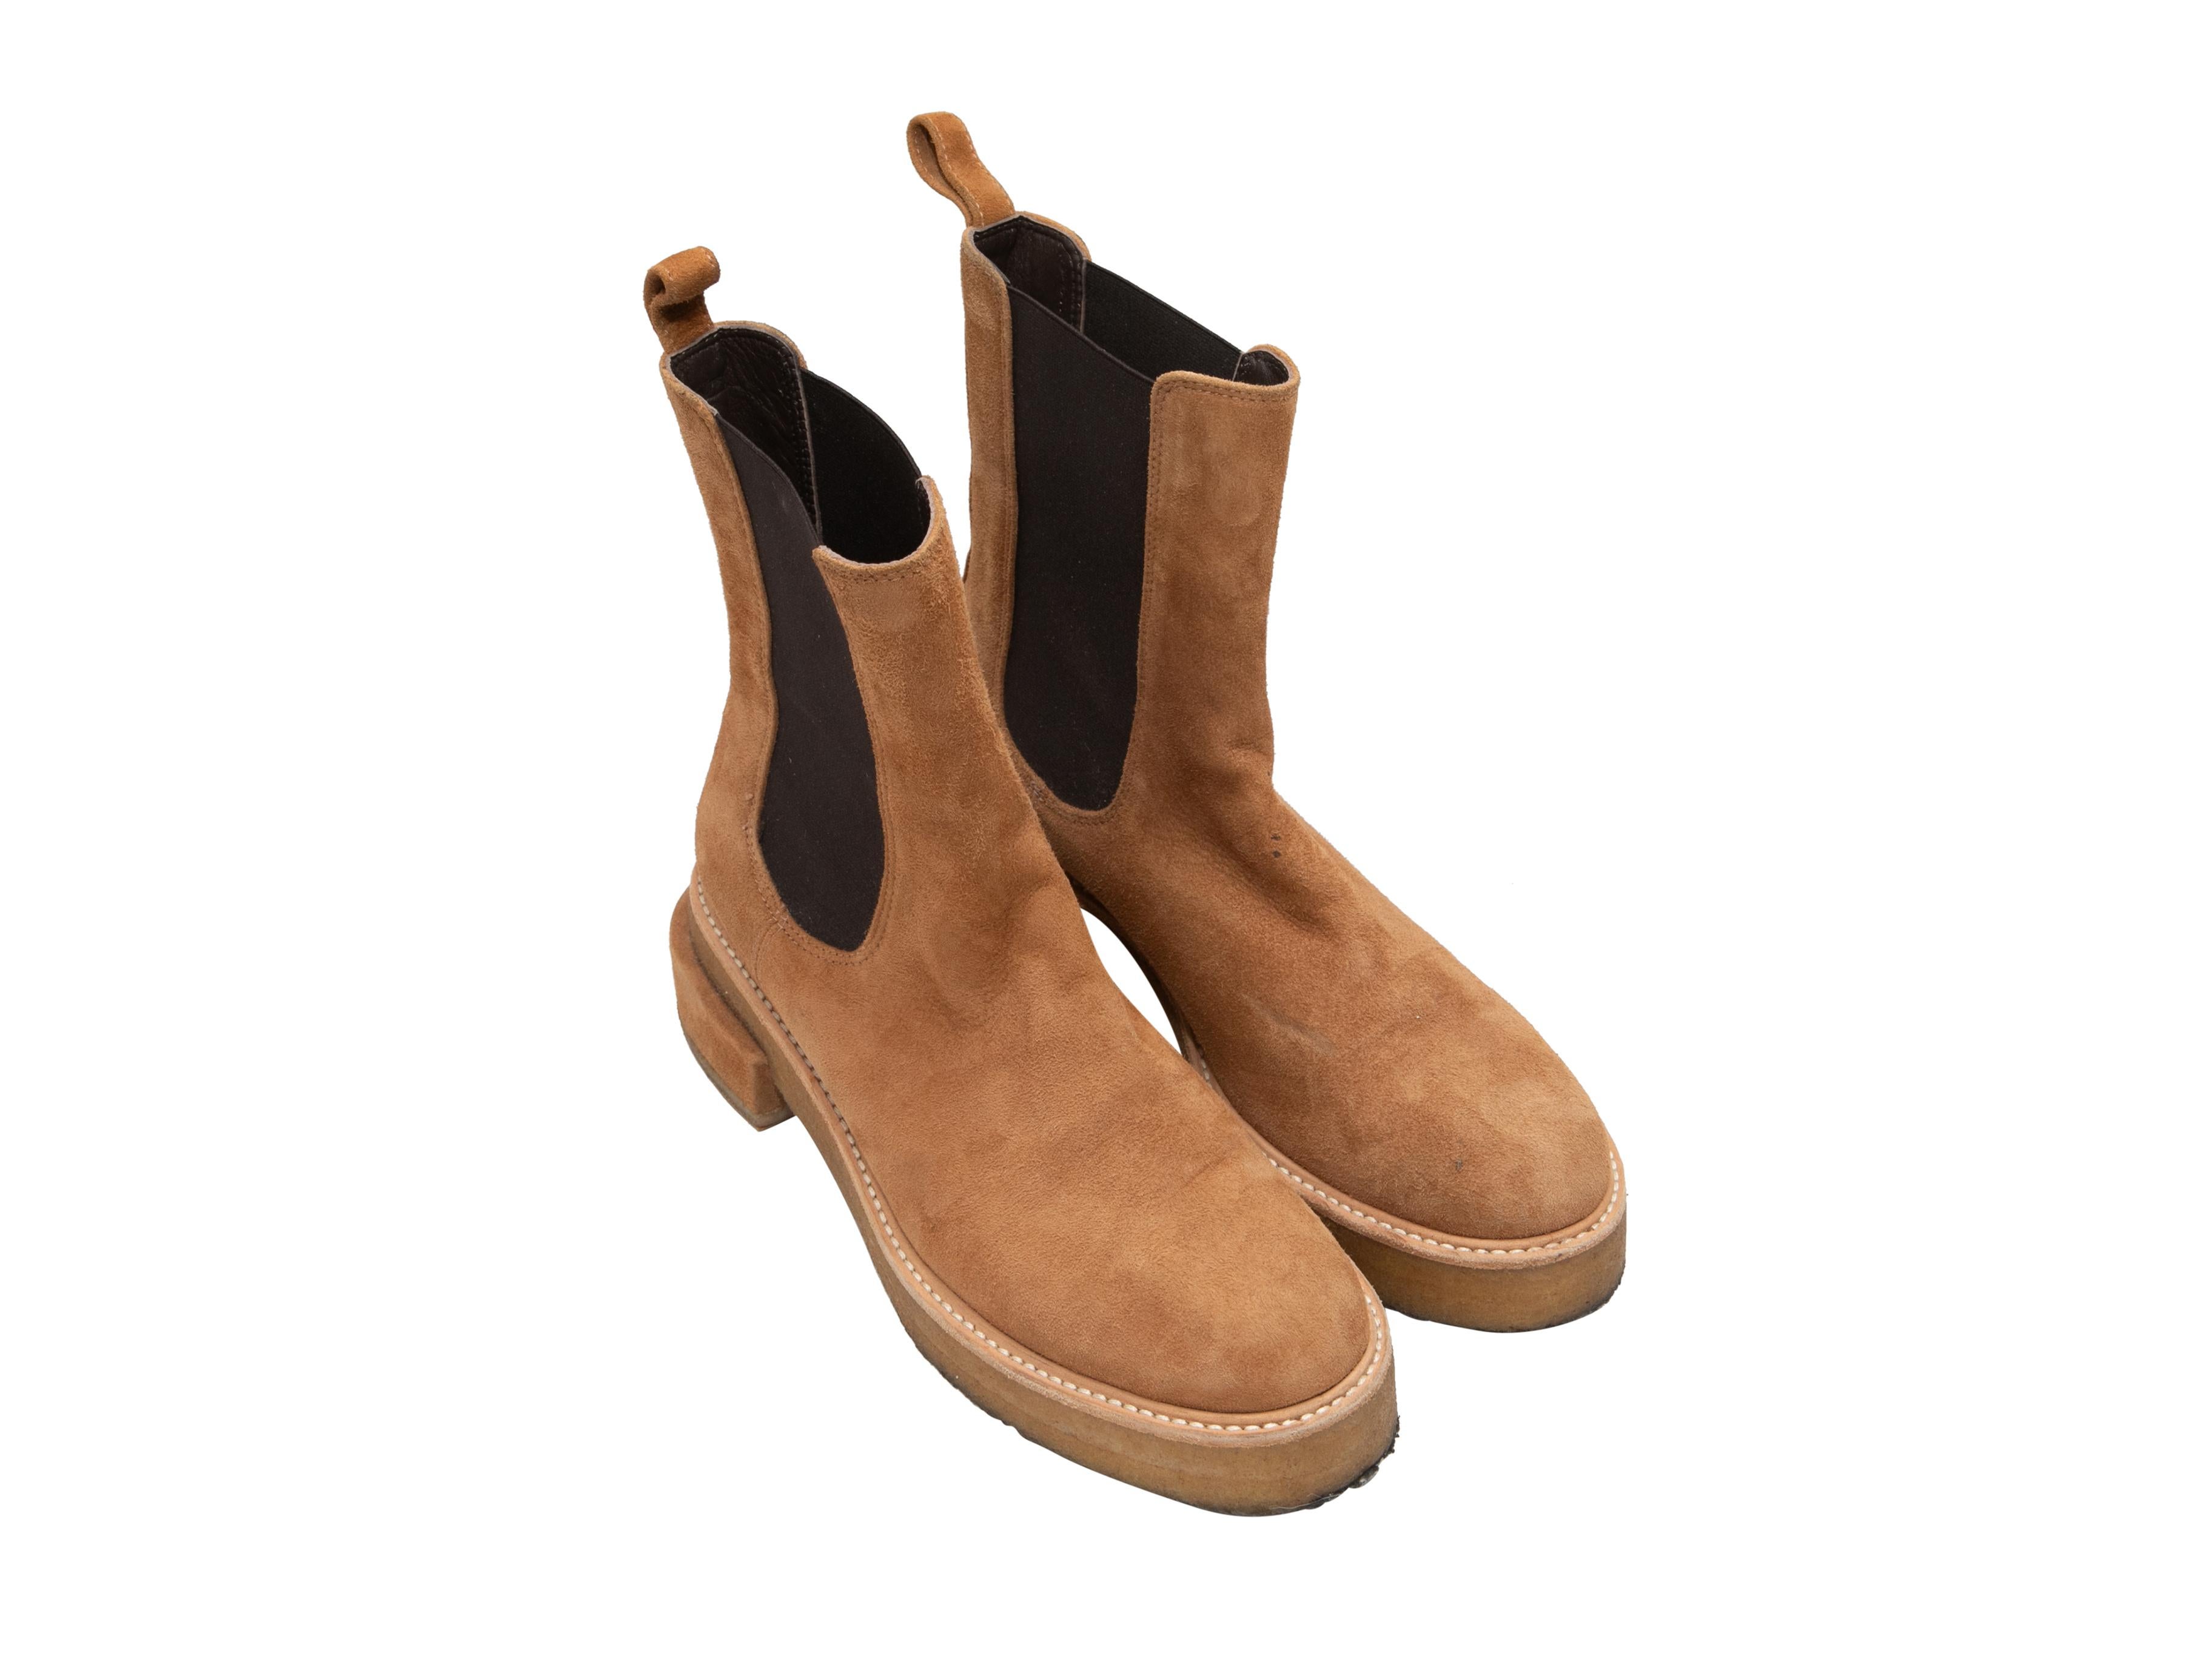 Tan suede platform boots by Frame. Elasticized gores at sides. Crepe rubber soles. 7.25